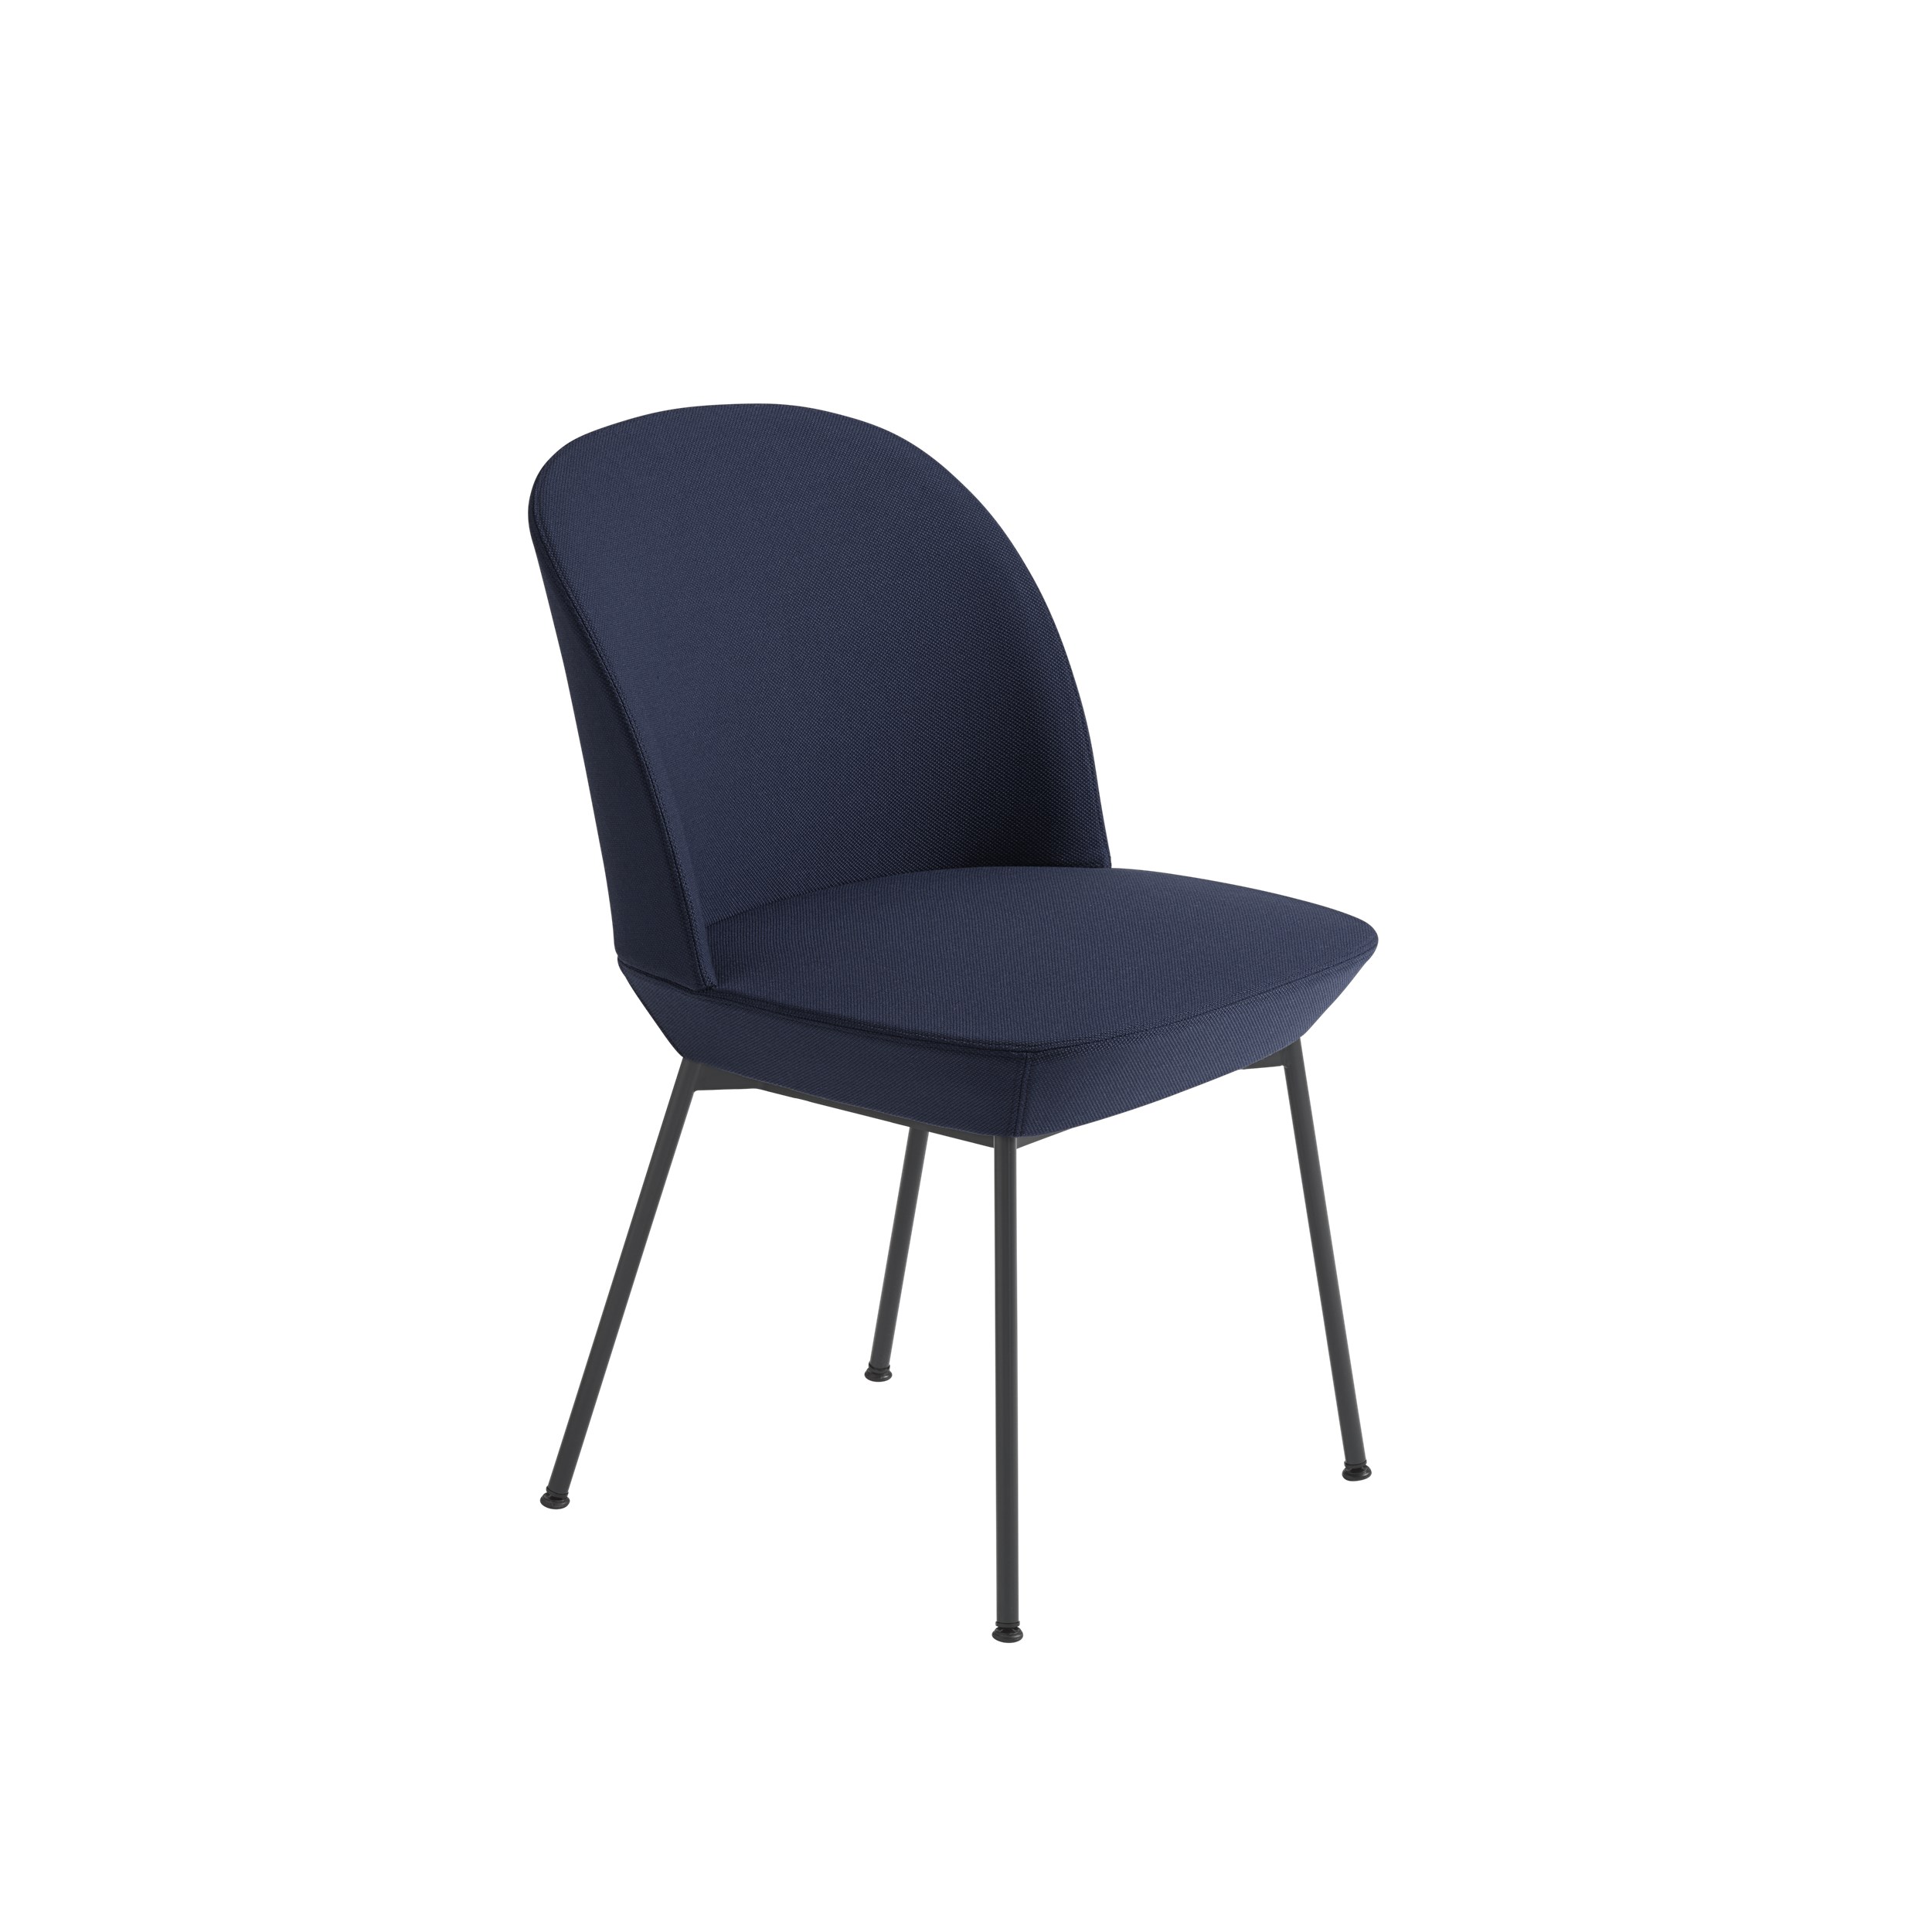 OSLO dining chair